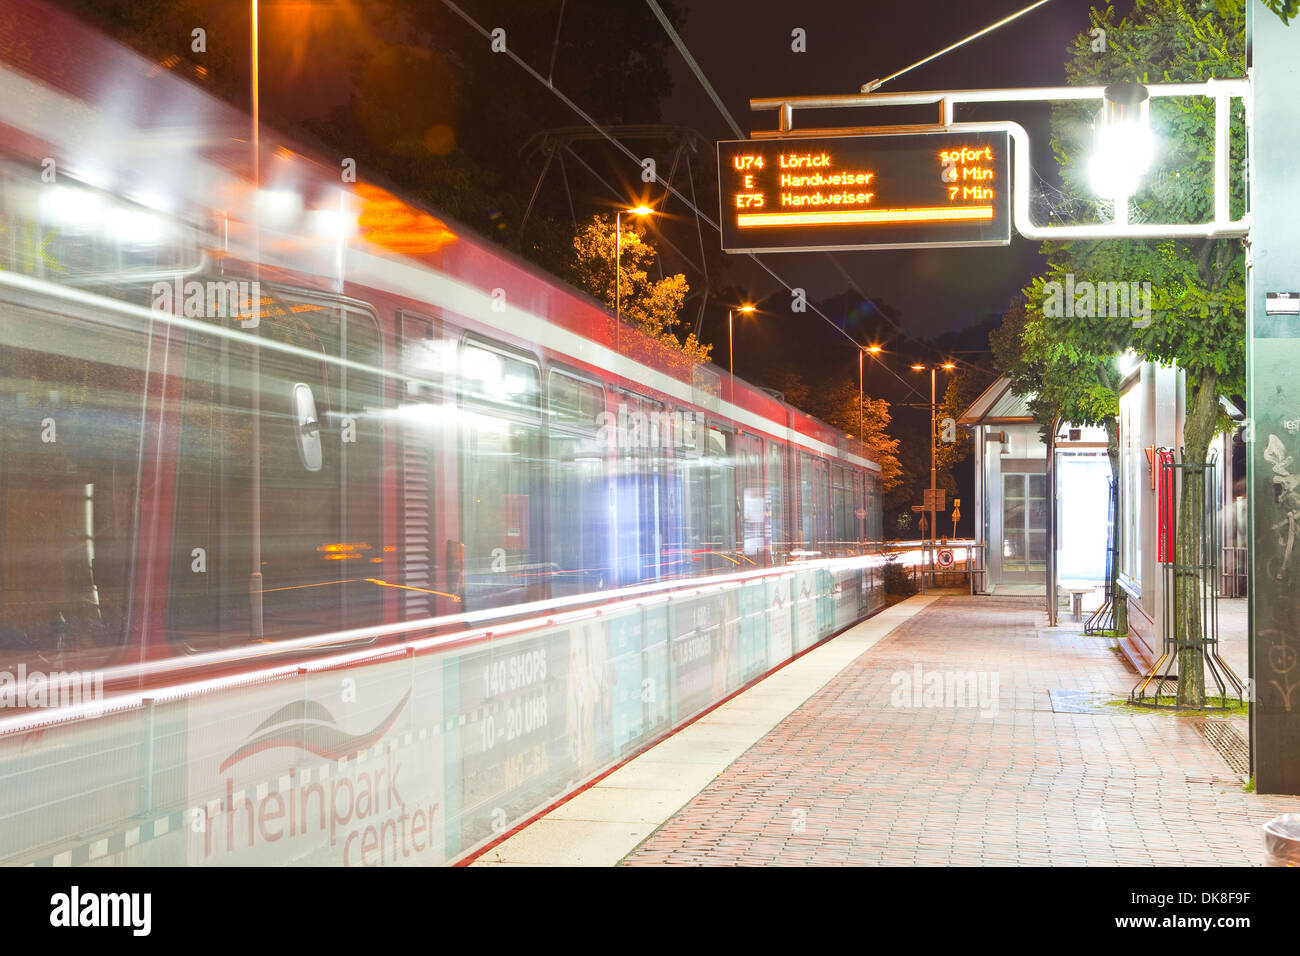 A metro train passes through s a station in Dusseldorf. Stock Photo